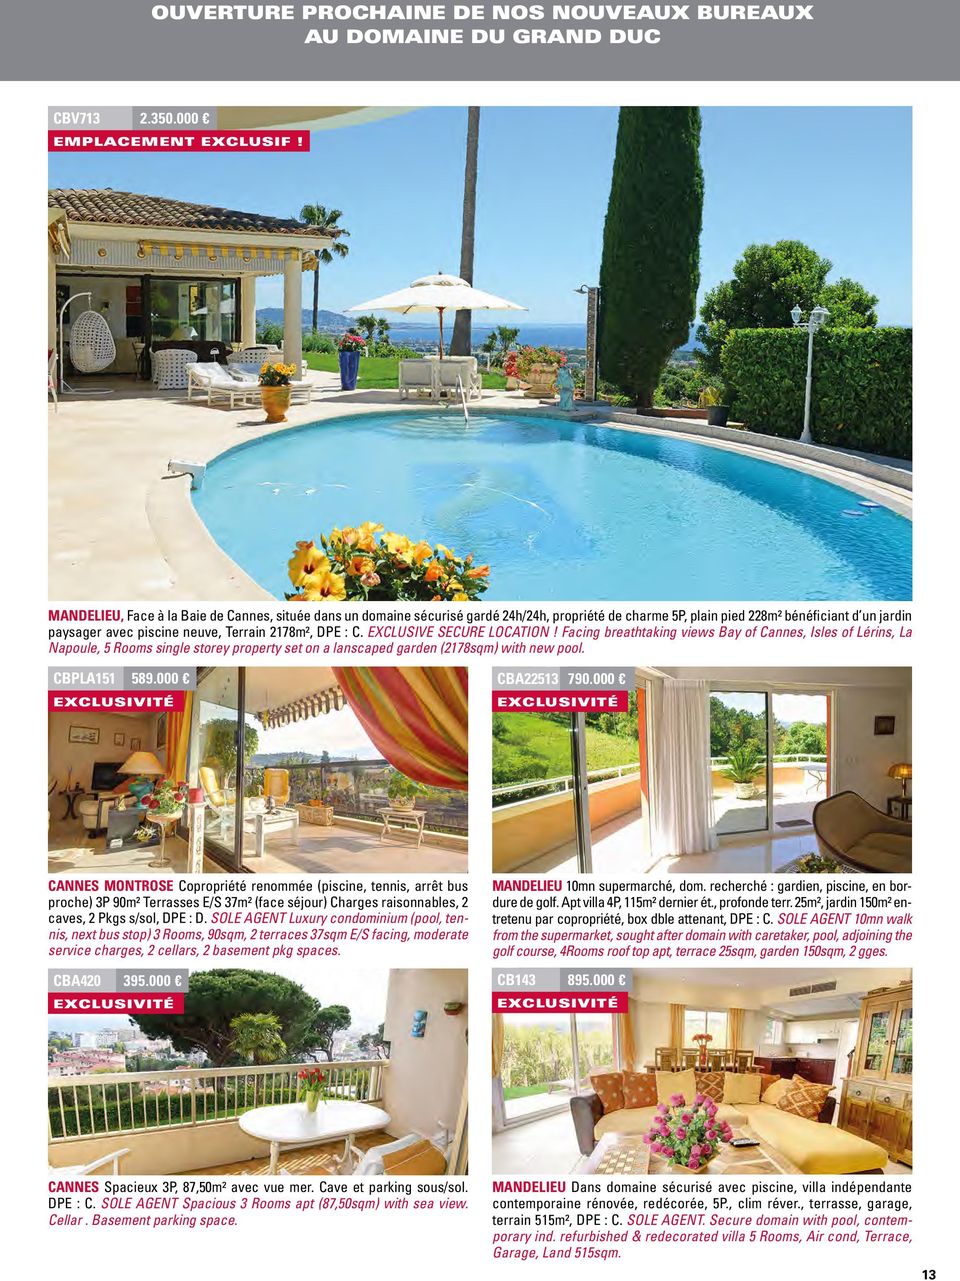 C. EXCLUSIVE SECURE LOCATION! Facing breathtaking views Bay of Cannes, Isles of Lérins, La Napoule, 5 Rooms single storey property set on a lanscaped garden (2178sqm) with new pool. CBPLA151 589.